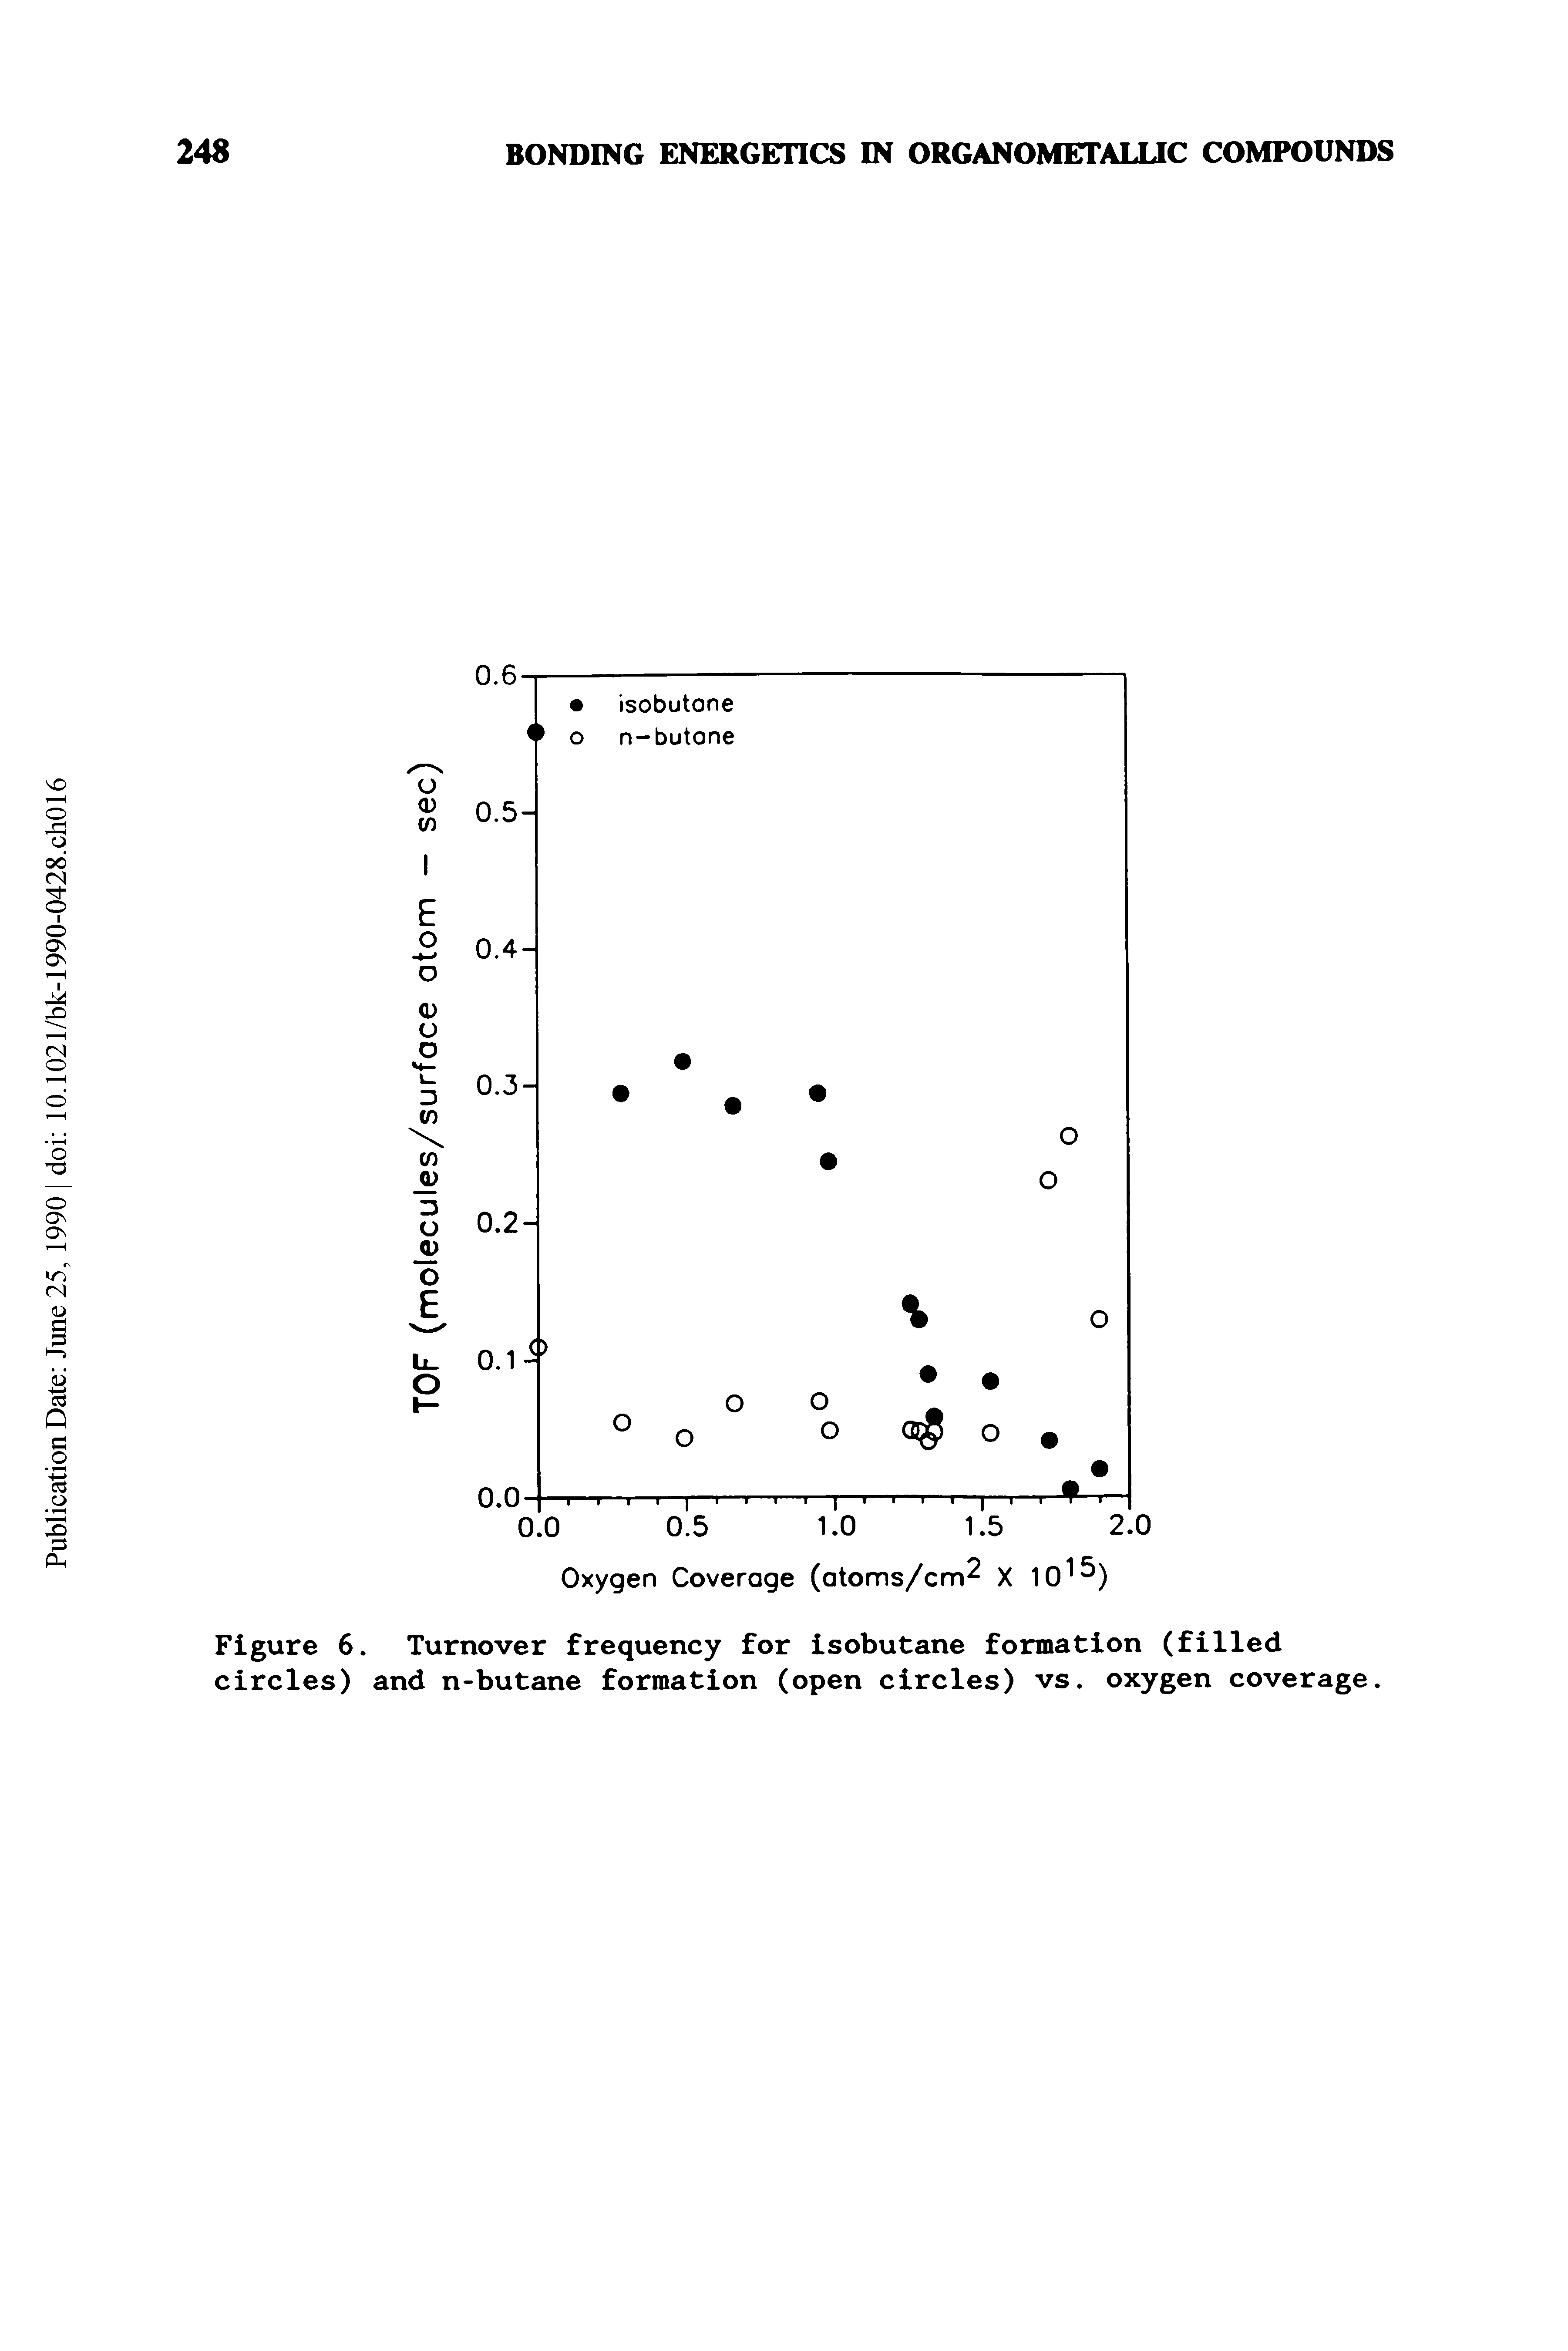 Figure 6. Turnover frequency for isobutane formation (filled circles) and n-butane formation (open circles) vs. oxygen coverage.